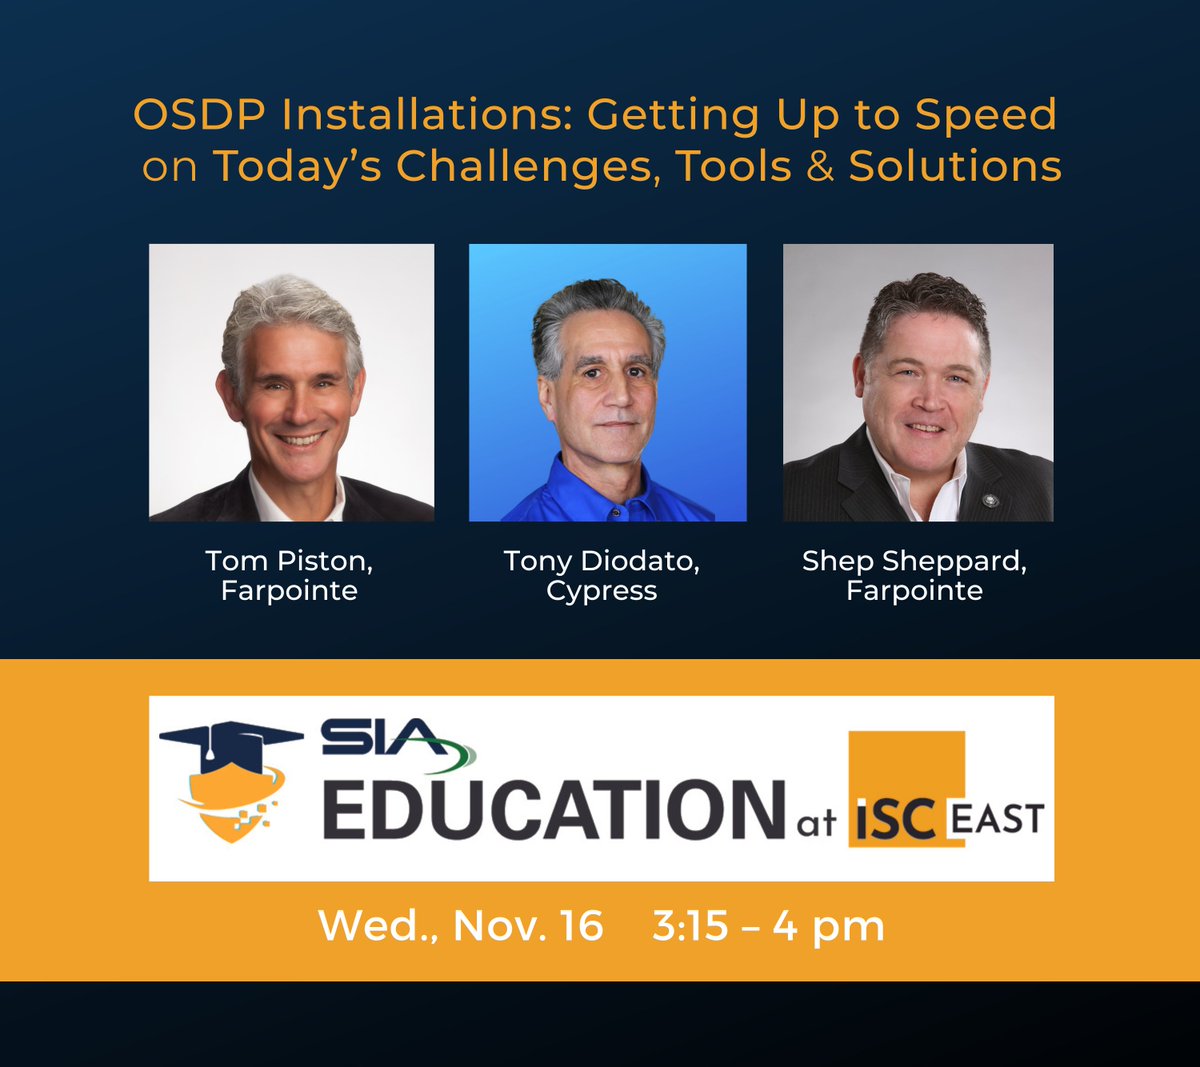 Learn about OSDP tools, installations and retrofit challenges in this ed session at #ISCEast, 3:15 in Rm 1A07! lnkd.in/g_yUqKpc

Our own Tony Diodato, who co-chairs the @SIAonline  OSDP Subcommittee, will co-present along with Shep Sheppard & Tom Piston of @farpointe_data.